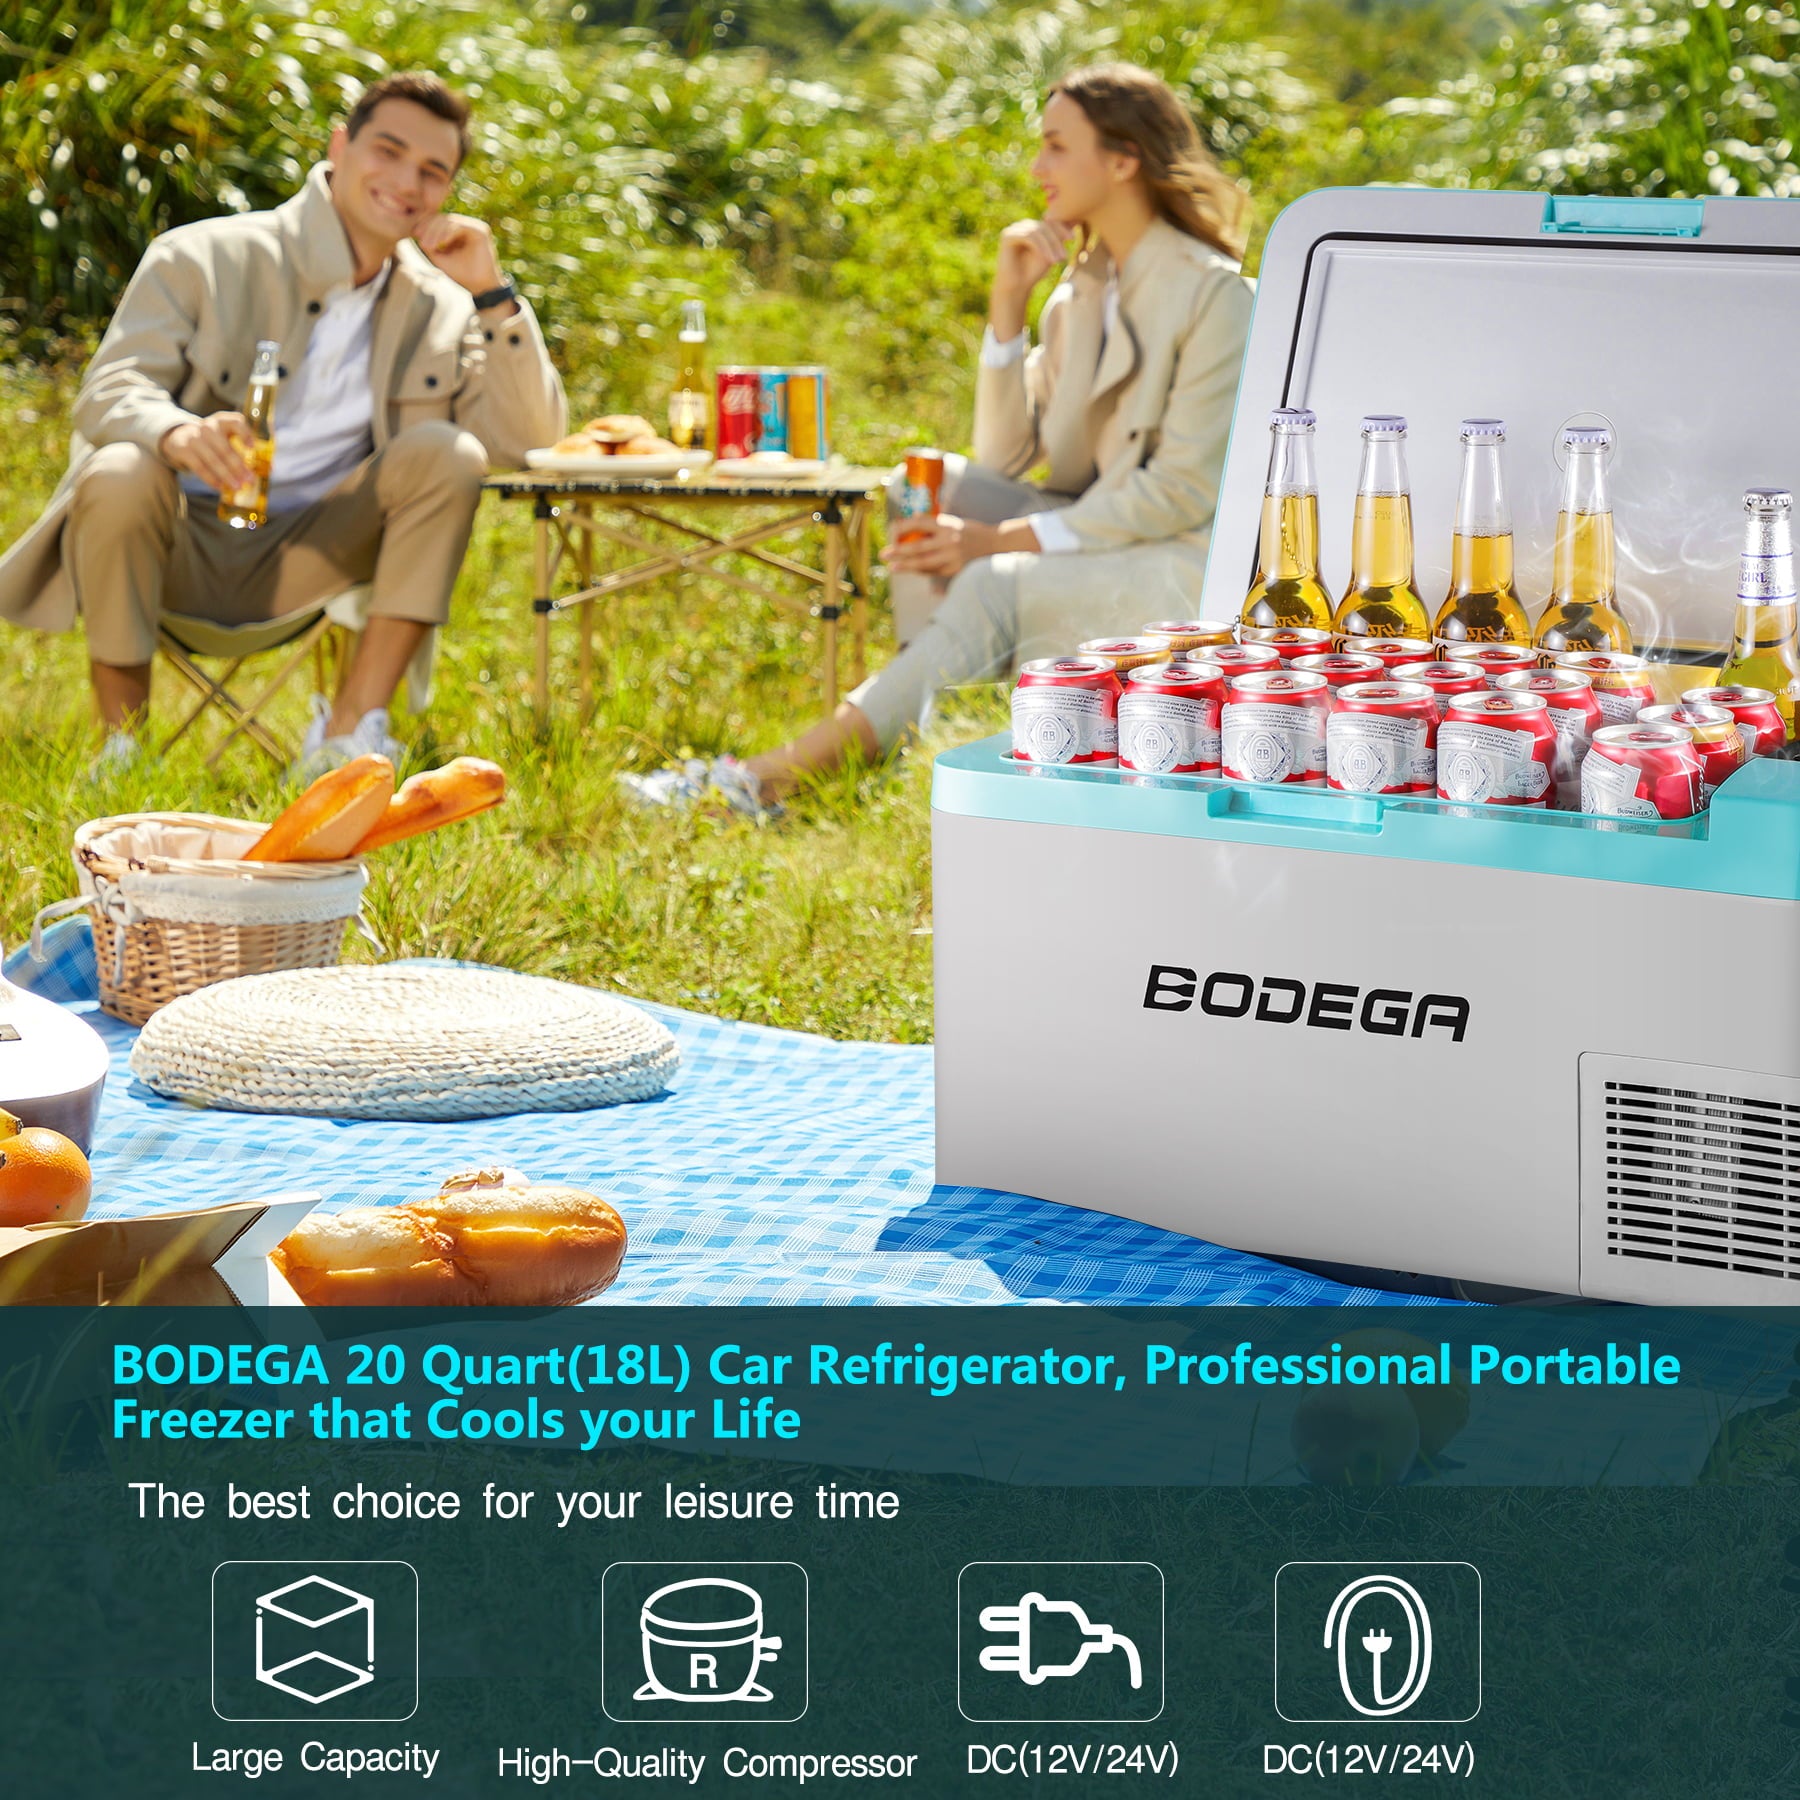 BODEGA 20 Quart Portable Car Refrigerator with Freezer and APP Control, 12/24V DC & 100/240V AC for Vehicles, Car, Truck, RV, Boat, Driving, Camping, Travel, Fishing, Picnic Outdoor and Home Use